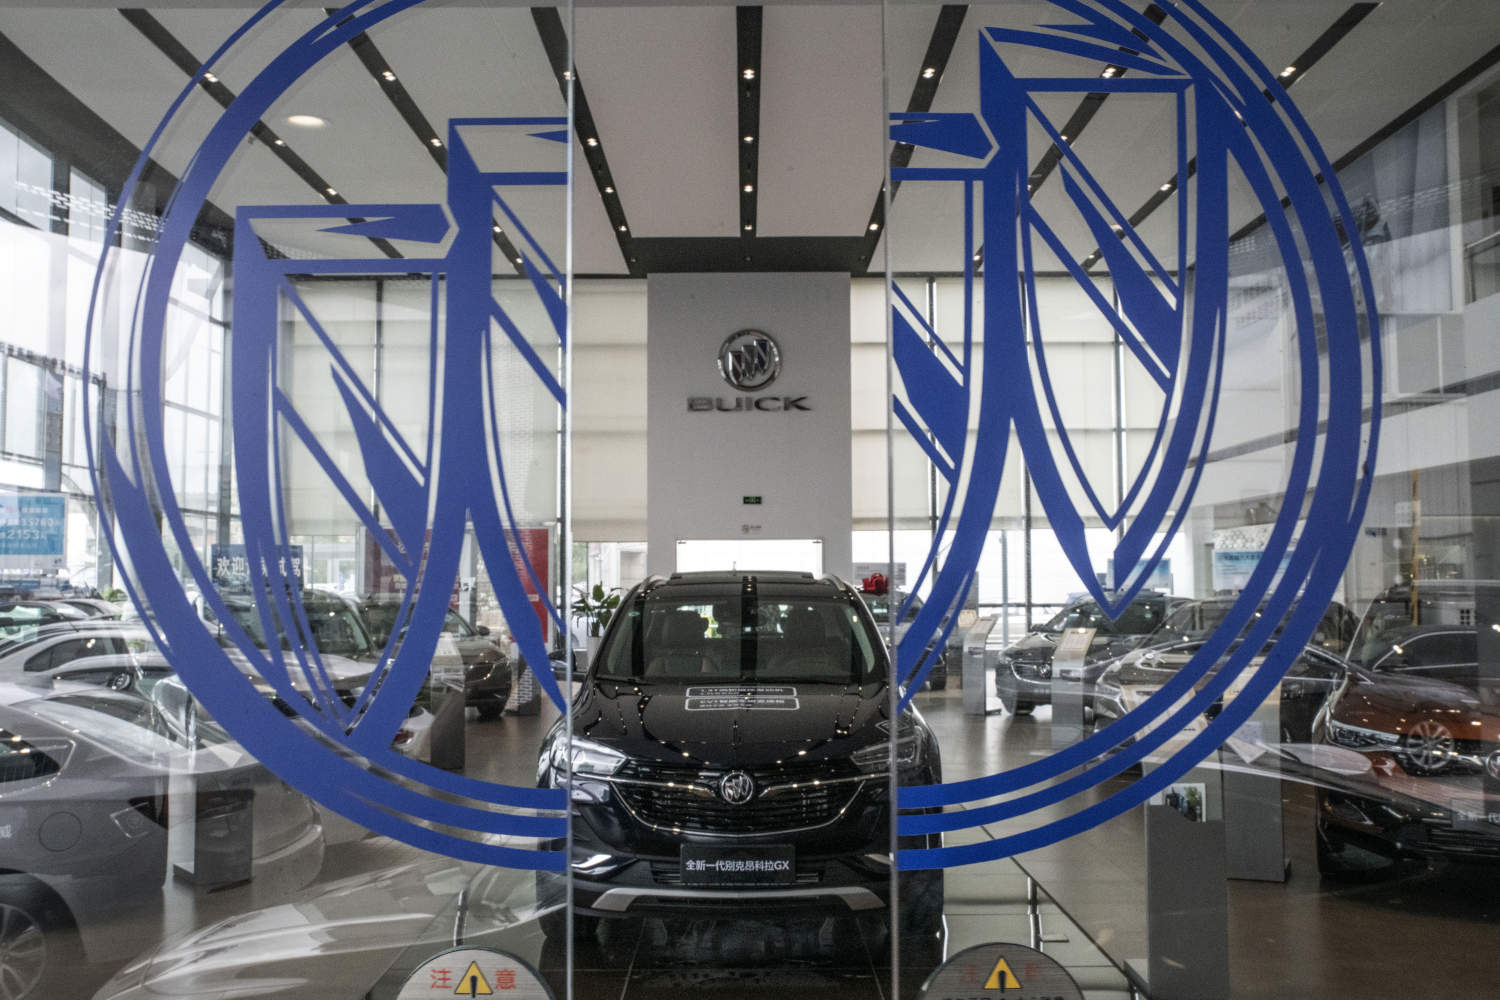 The best car brand for sales experience is the Buick dealership